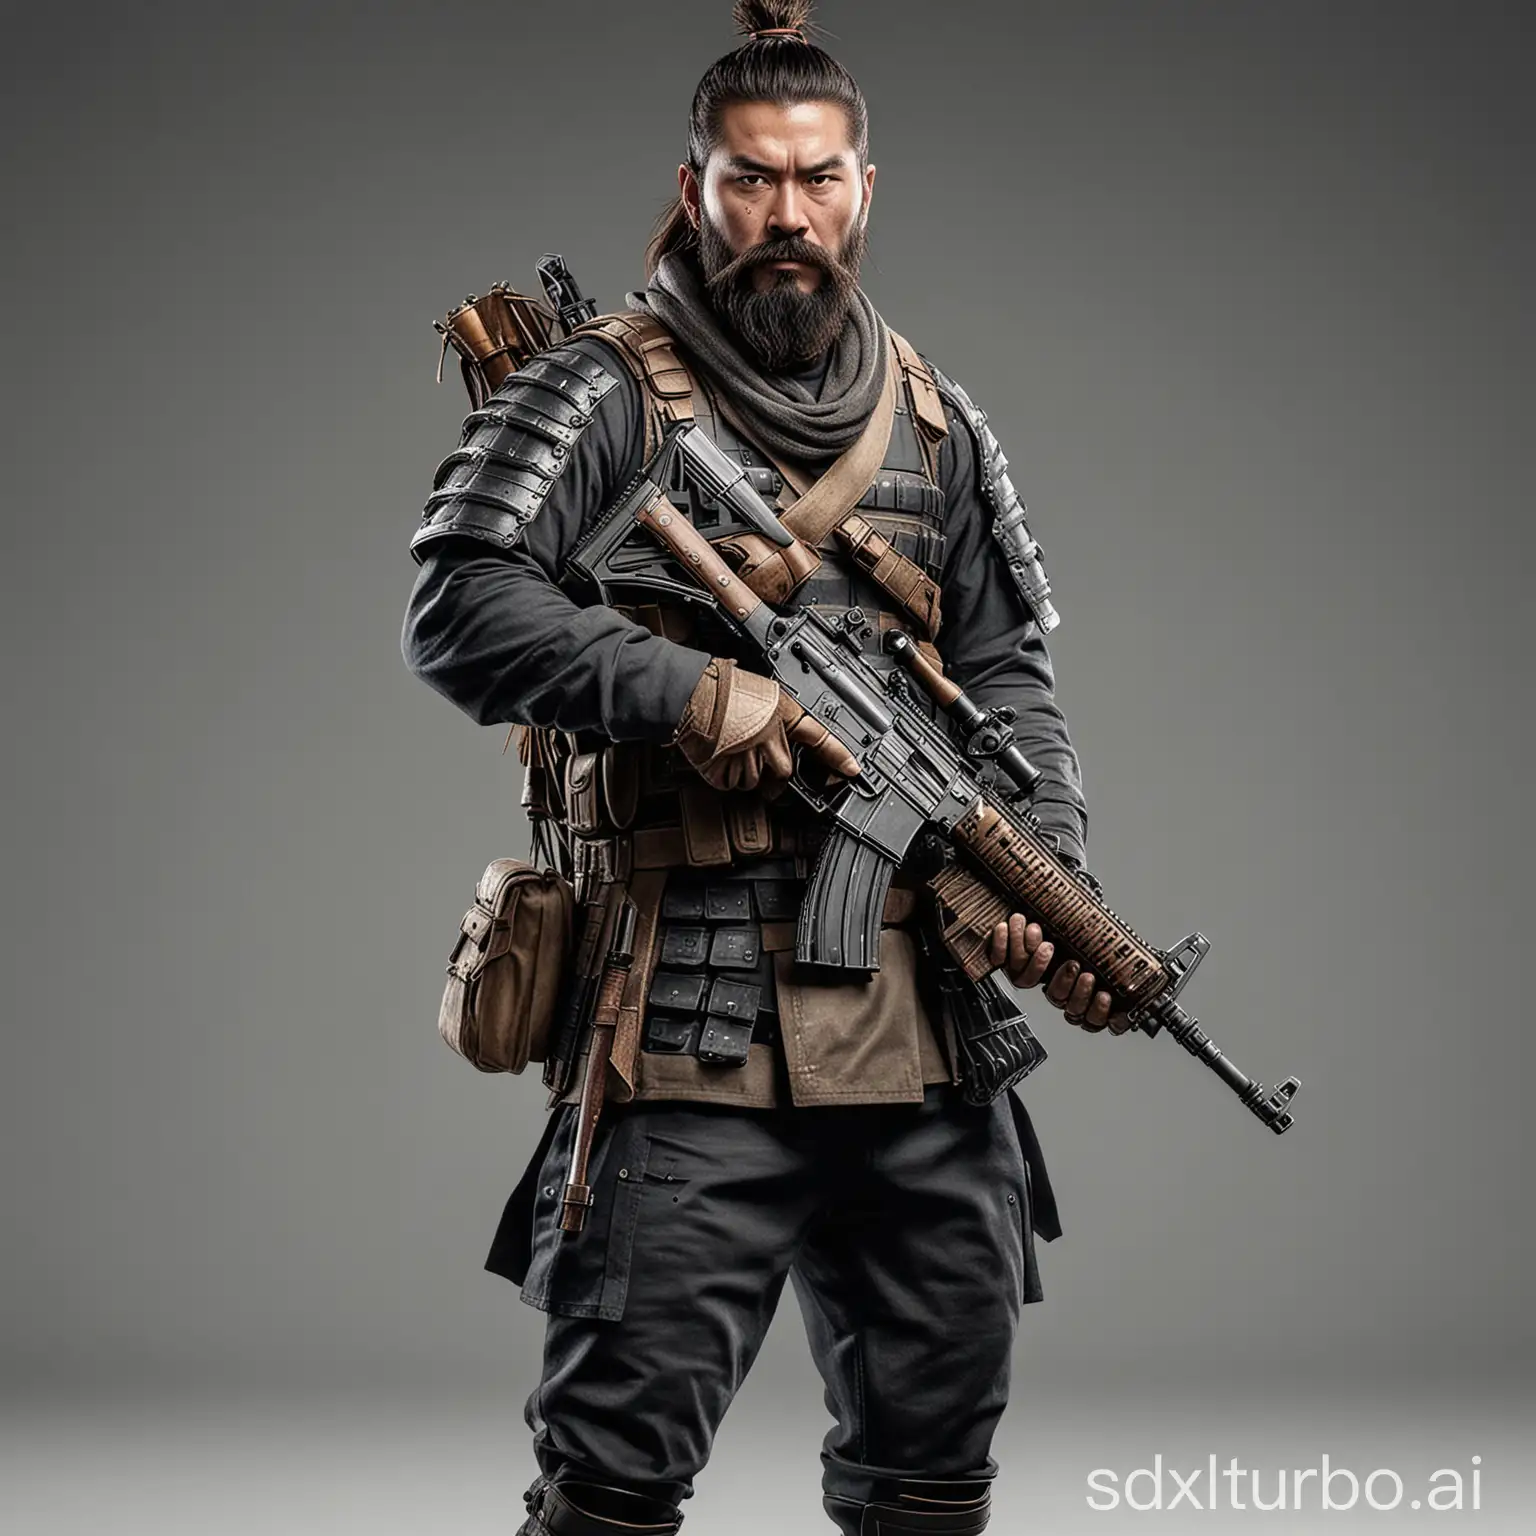 On a plain background is a bearded samurai holding an assault rifle PUBG with full armor in a full body portrait. This is a full body photo realistic high resolution image with sharp clean subject focus